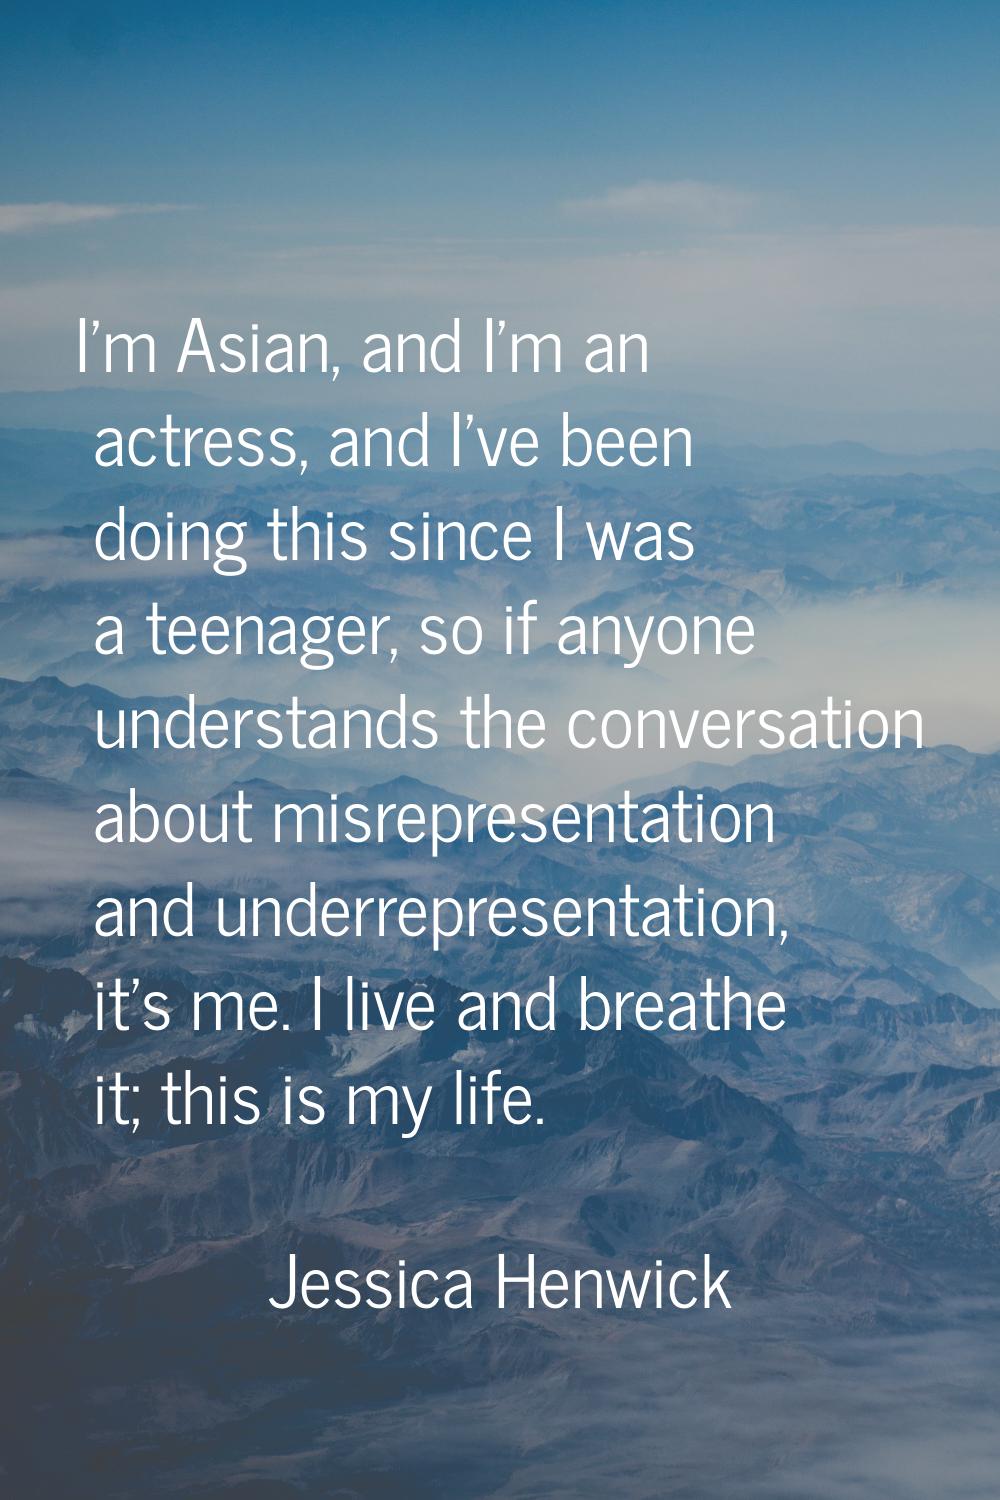 I'm Asian, and I'm an actress, and I've been doing this since I was a teenager, so if anyone unders